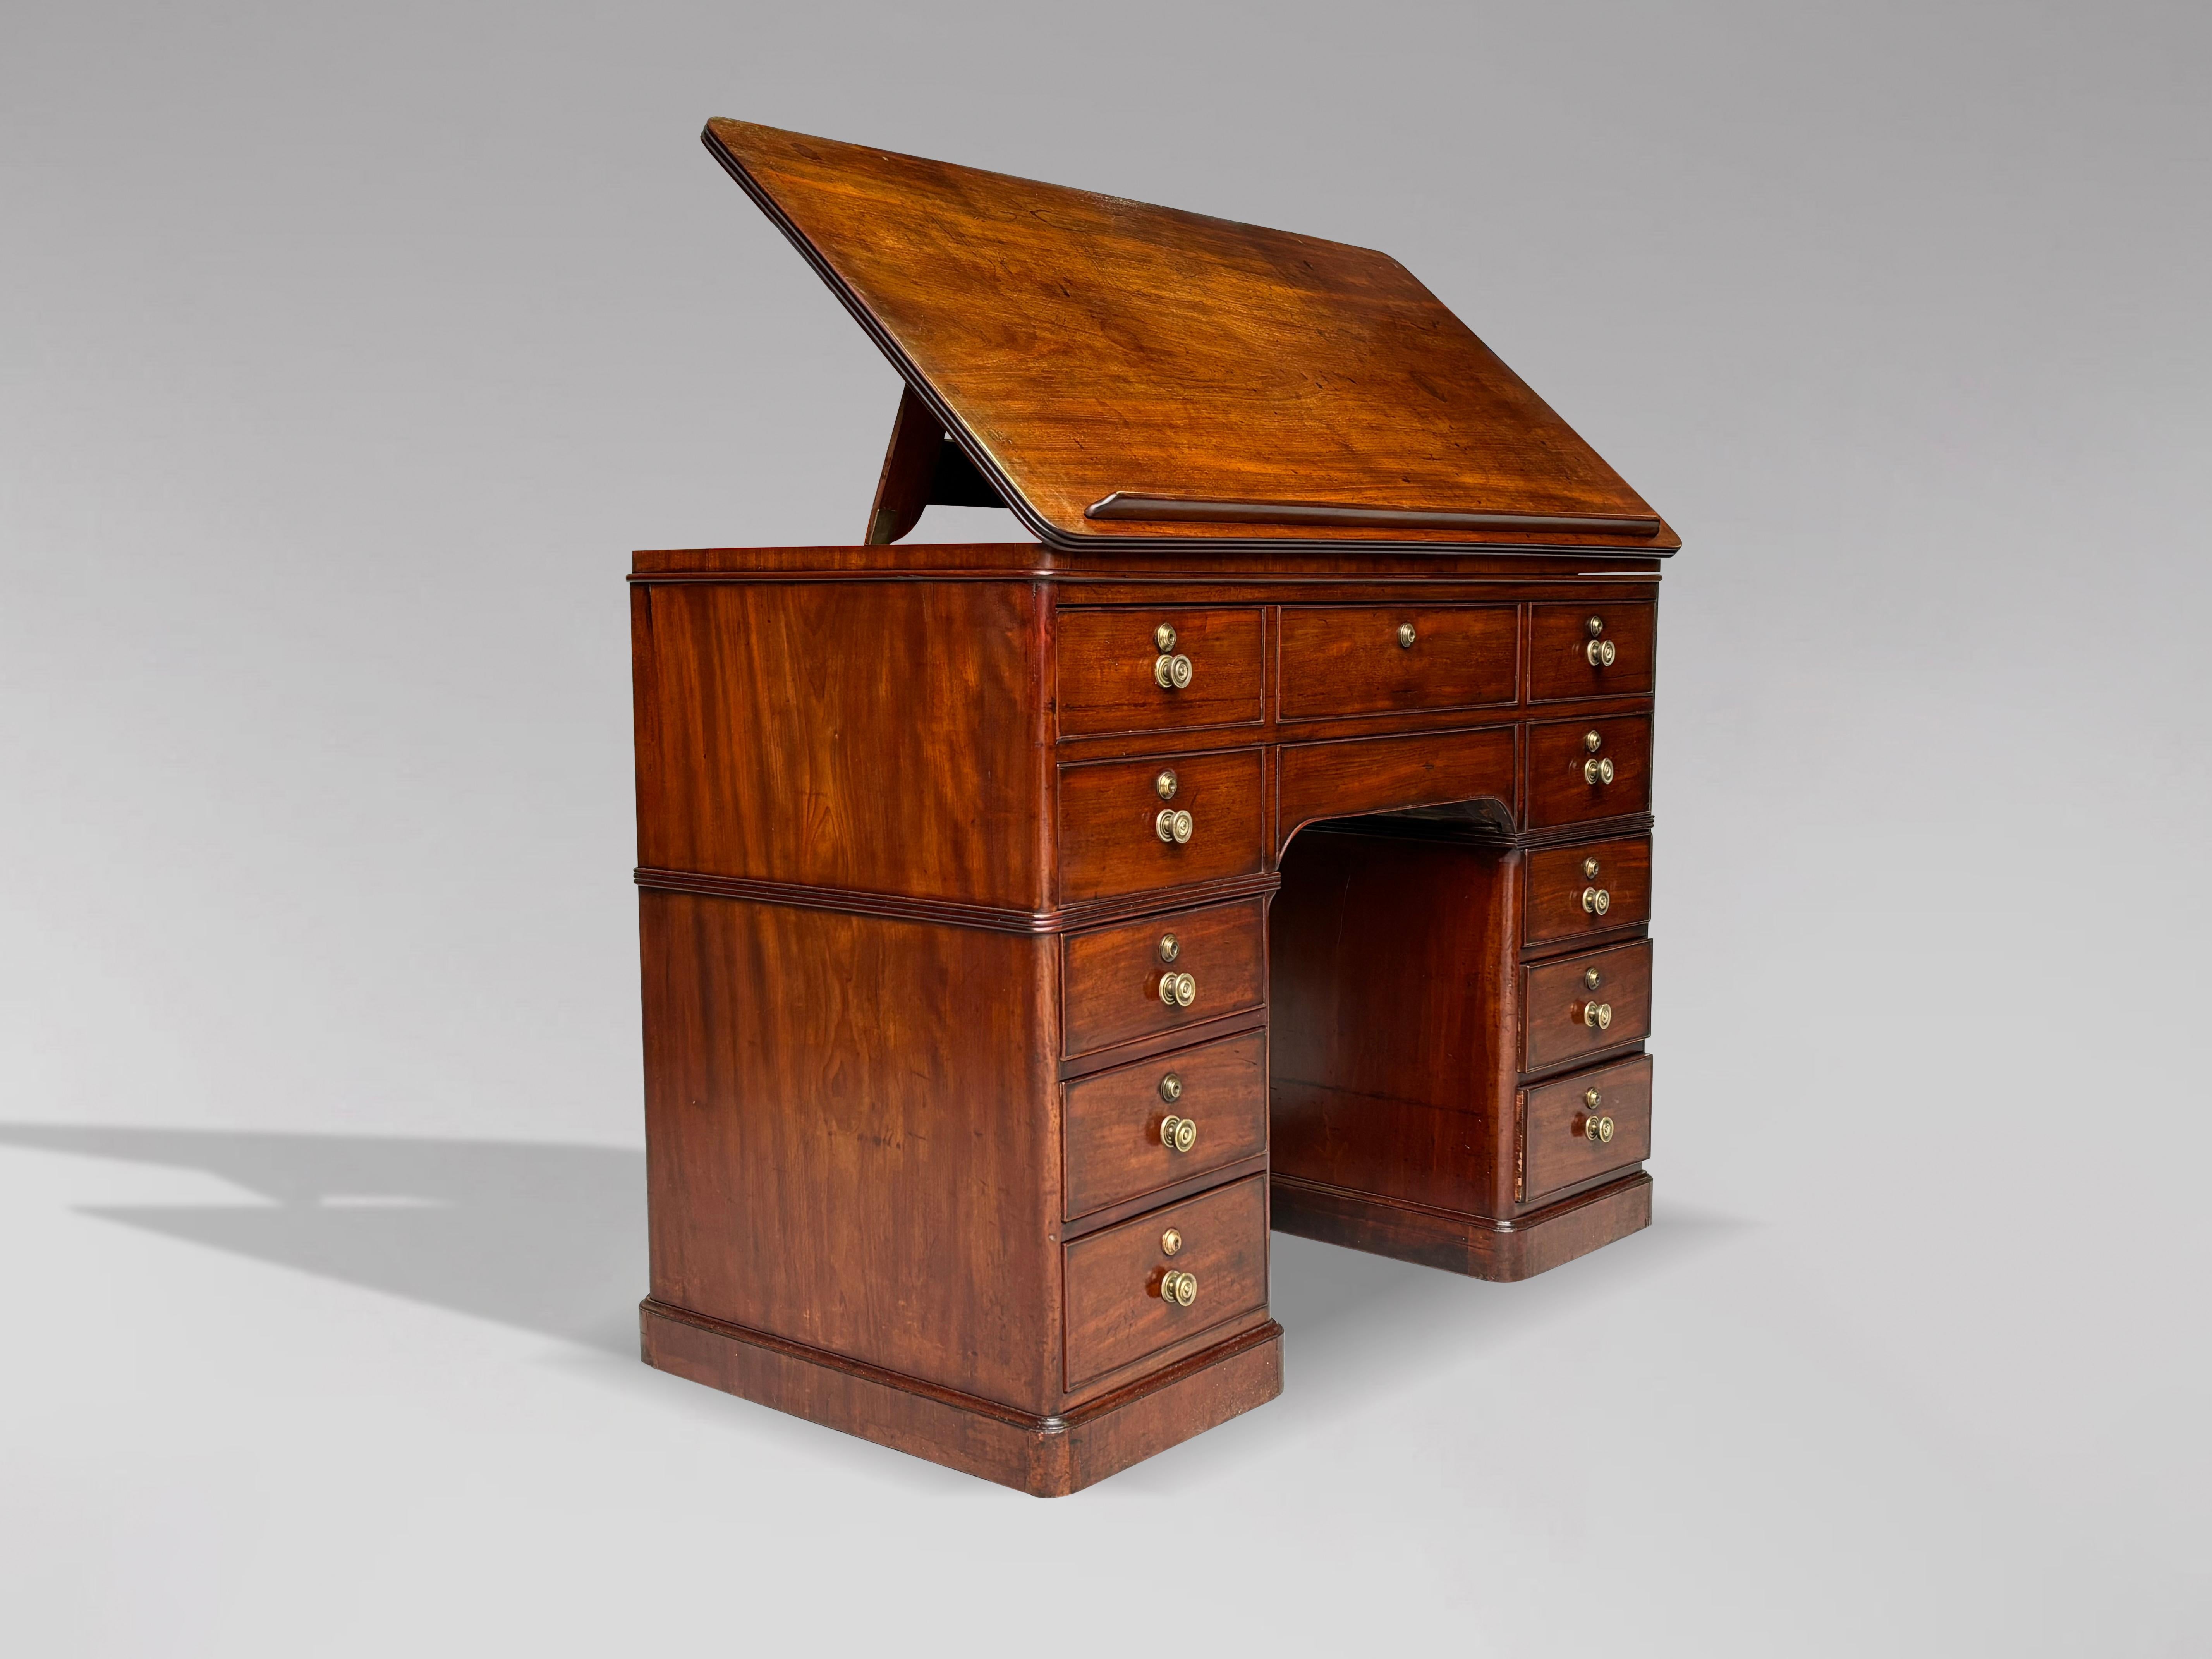 Polished 18th Century George III Period Mahogany Architect's Desk For Sale